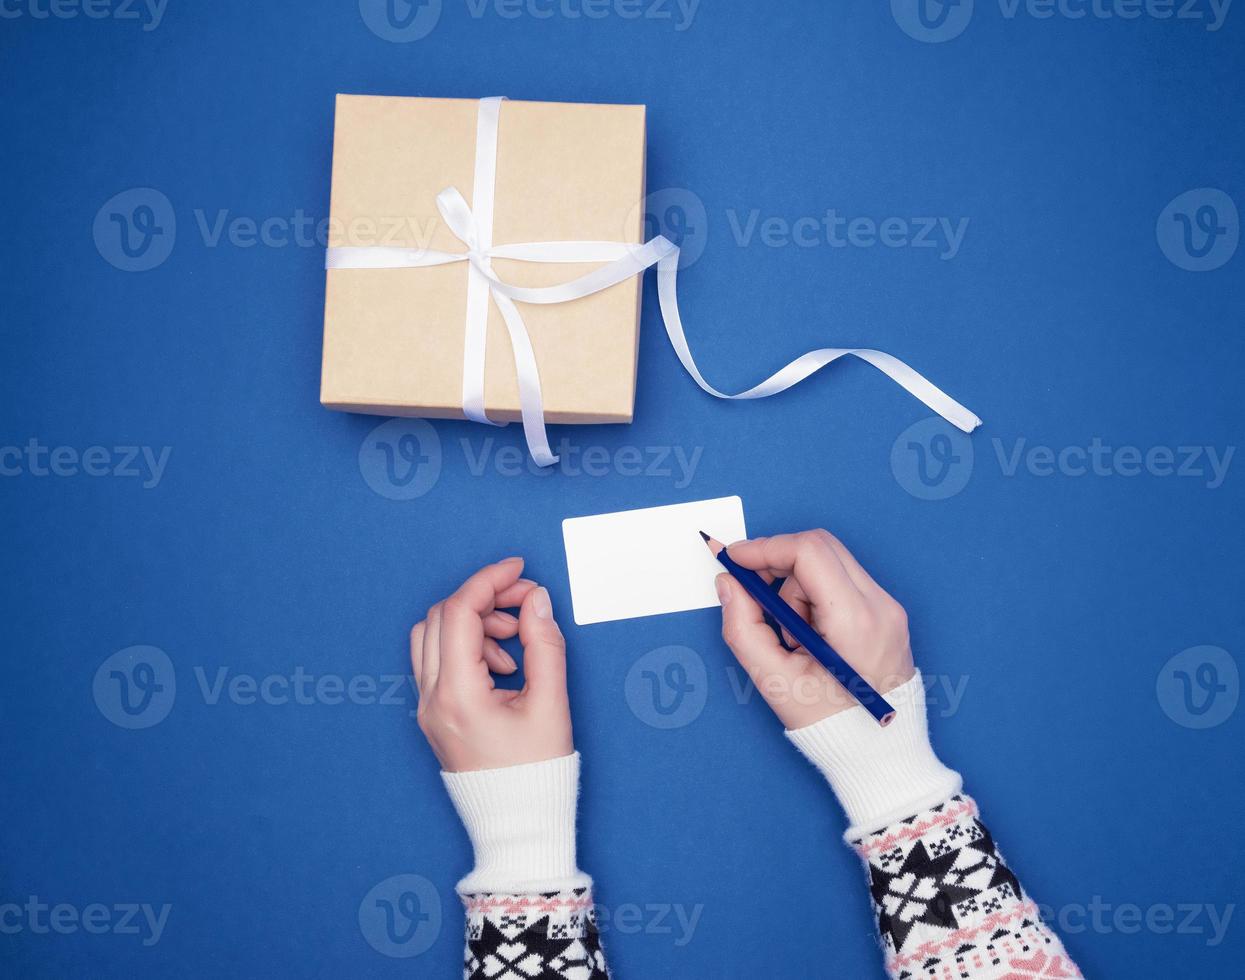 woman holds in her hand a blue wooden pencil and signs a white paper business card, next to a wrapped gift photo